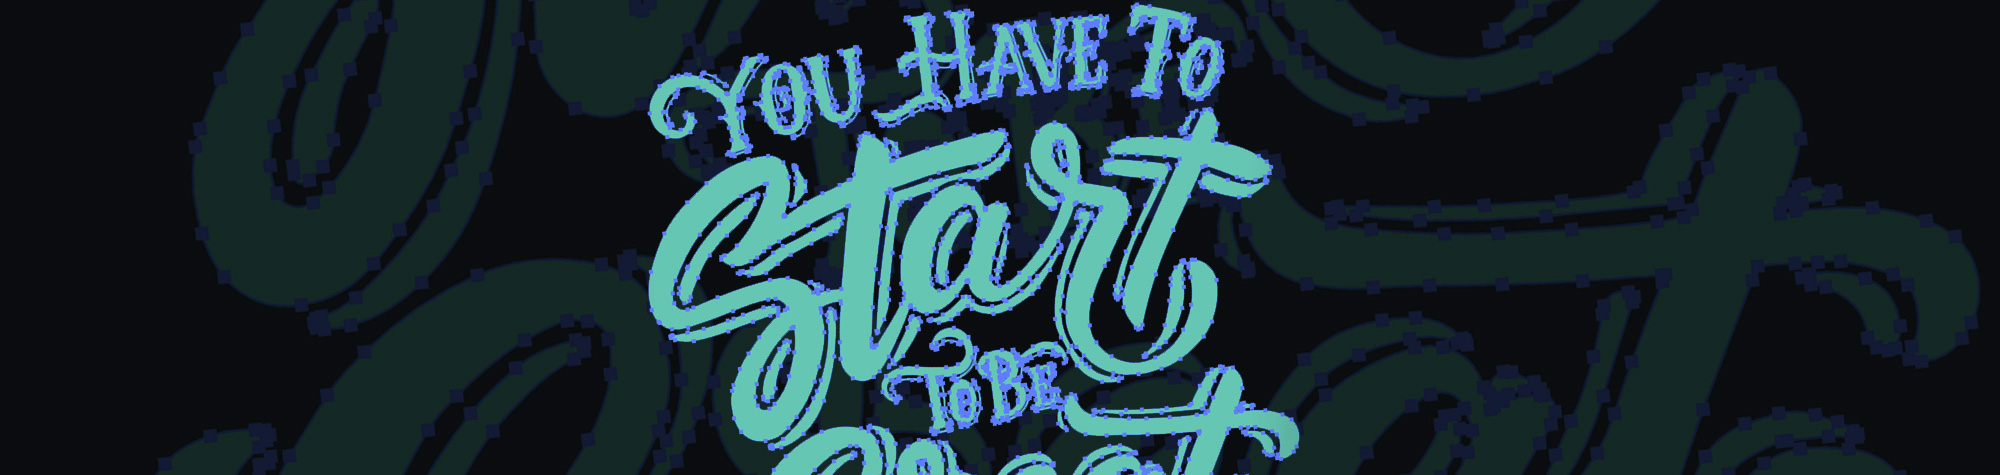 Live Trace Hand Lettering & Fonts for Logos in Adobe Illustrator & Photoshop